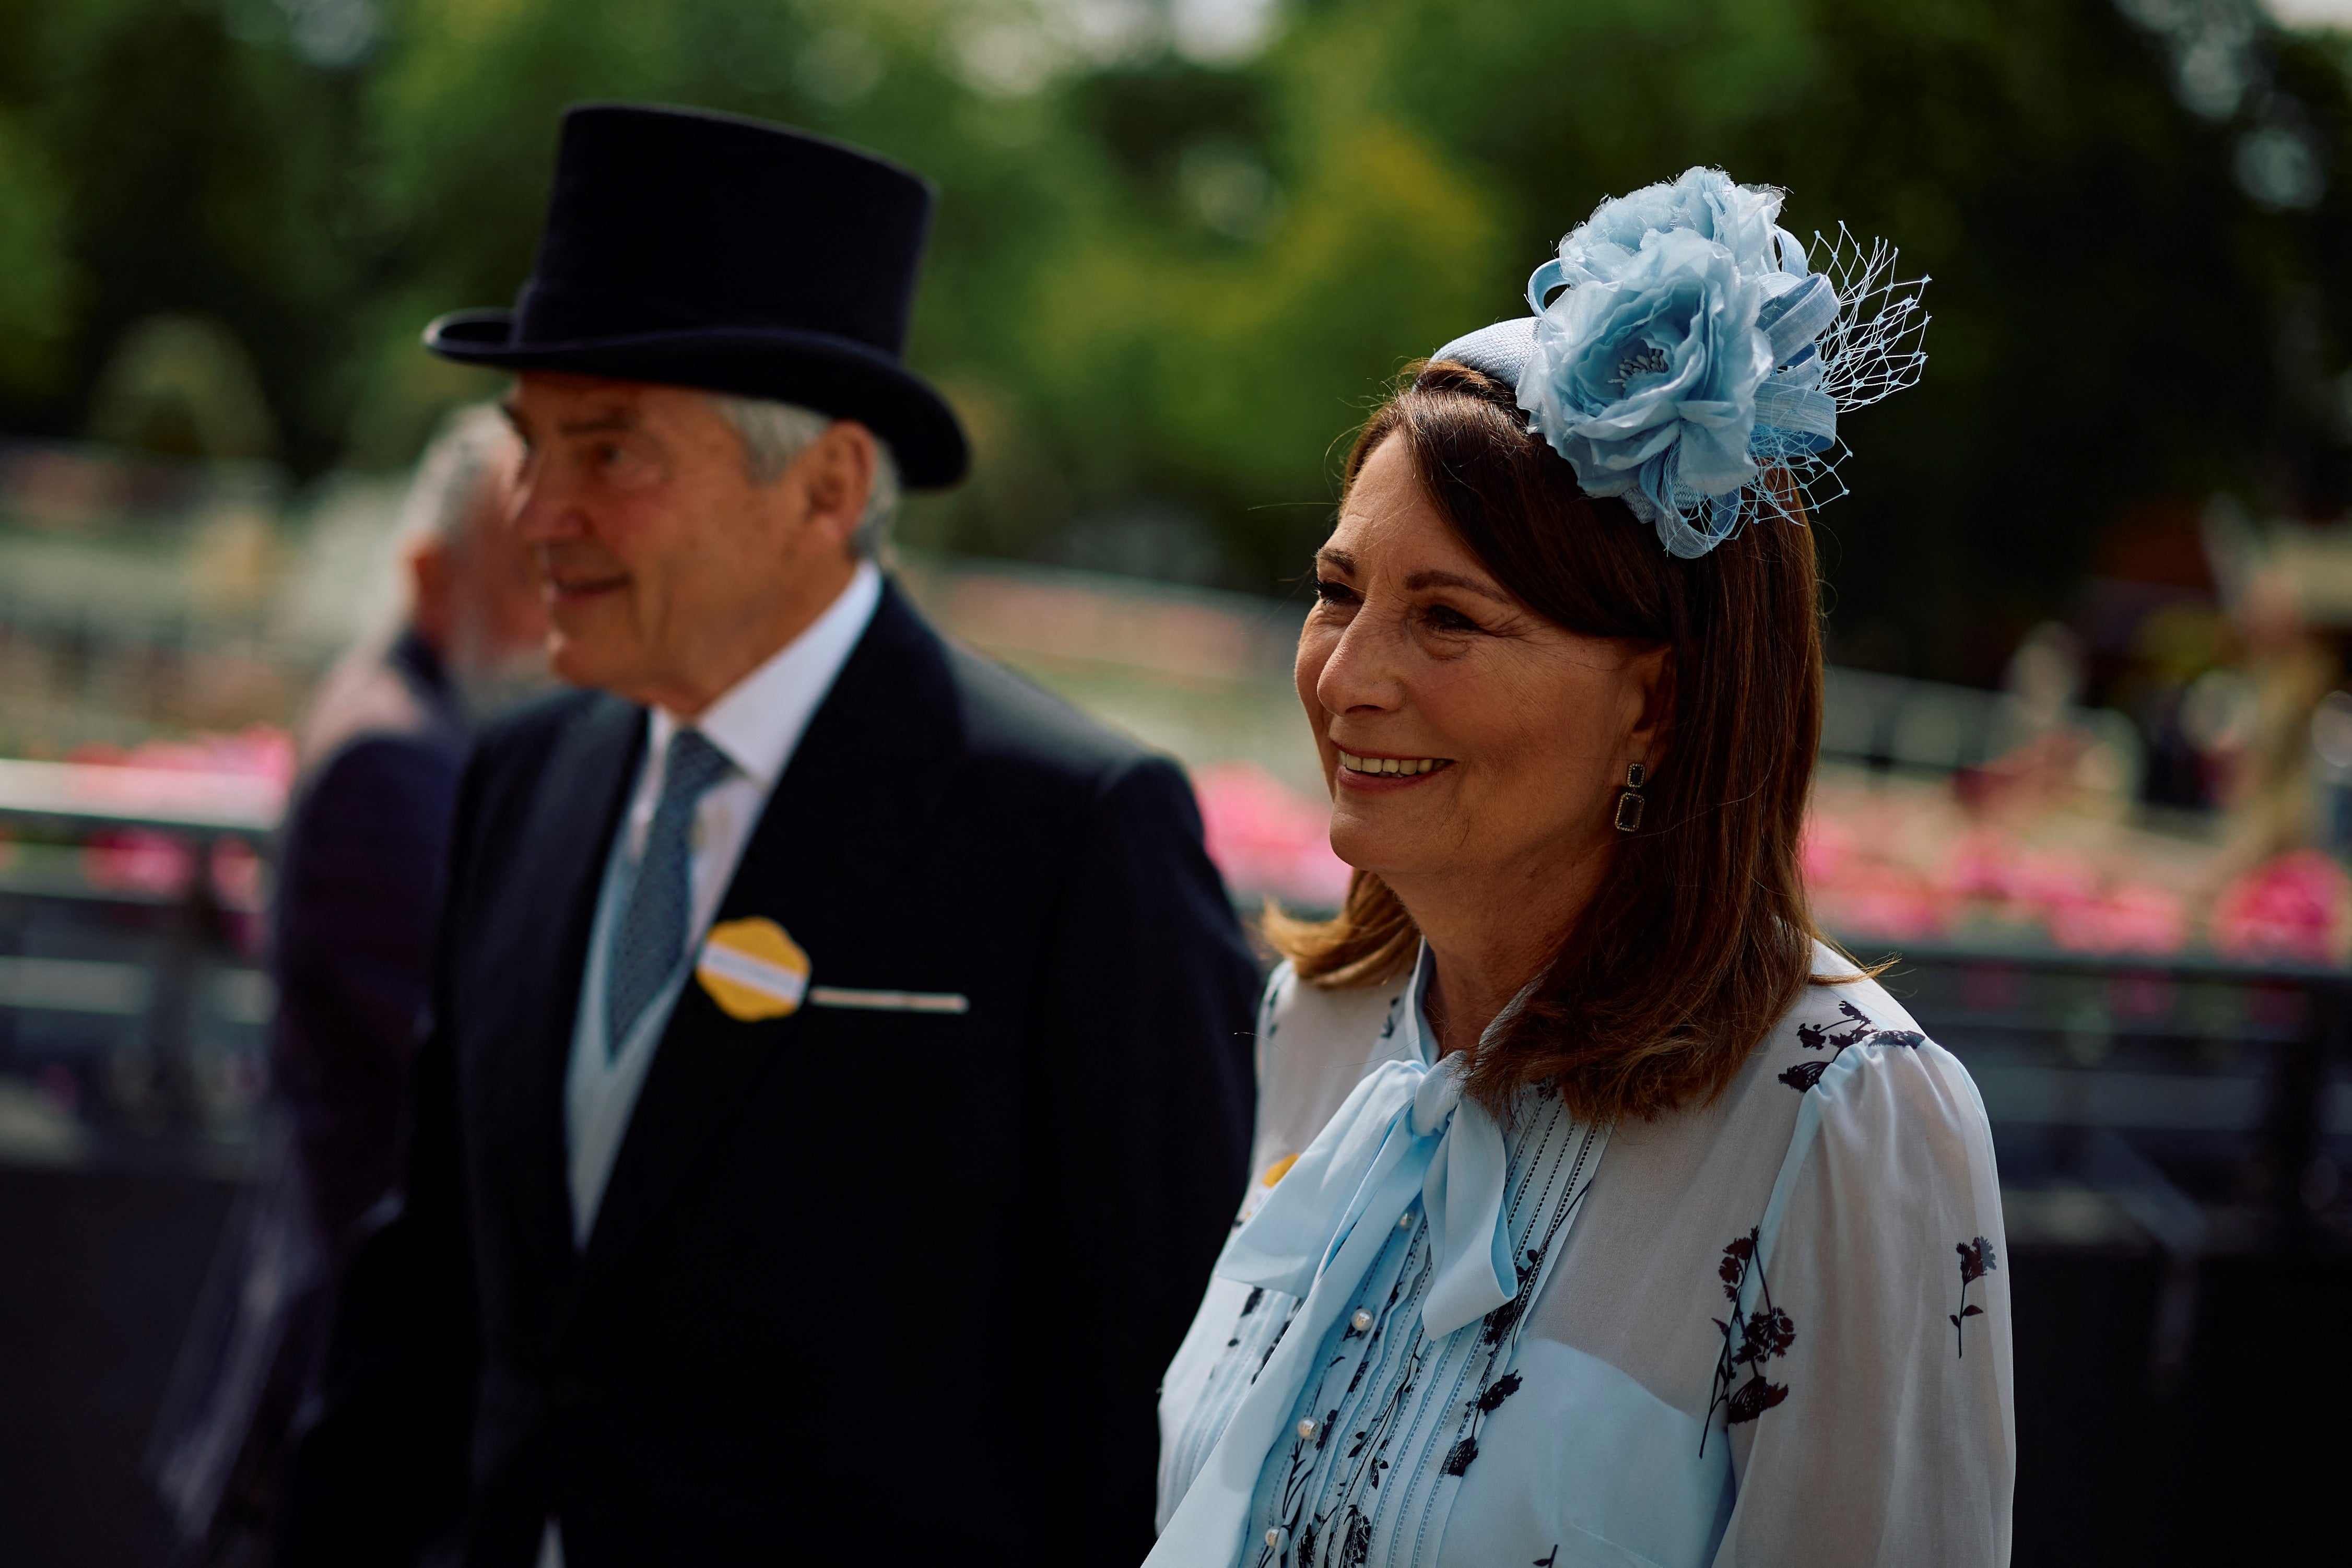 Kate Middleton’s parents have attended their first event since her cancer diagnosis.